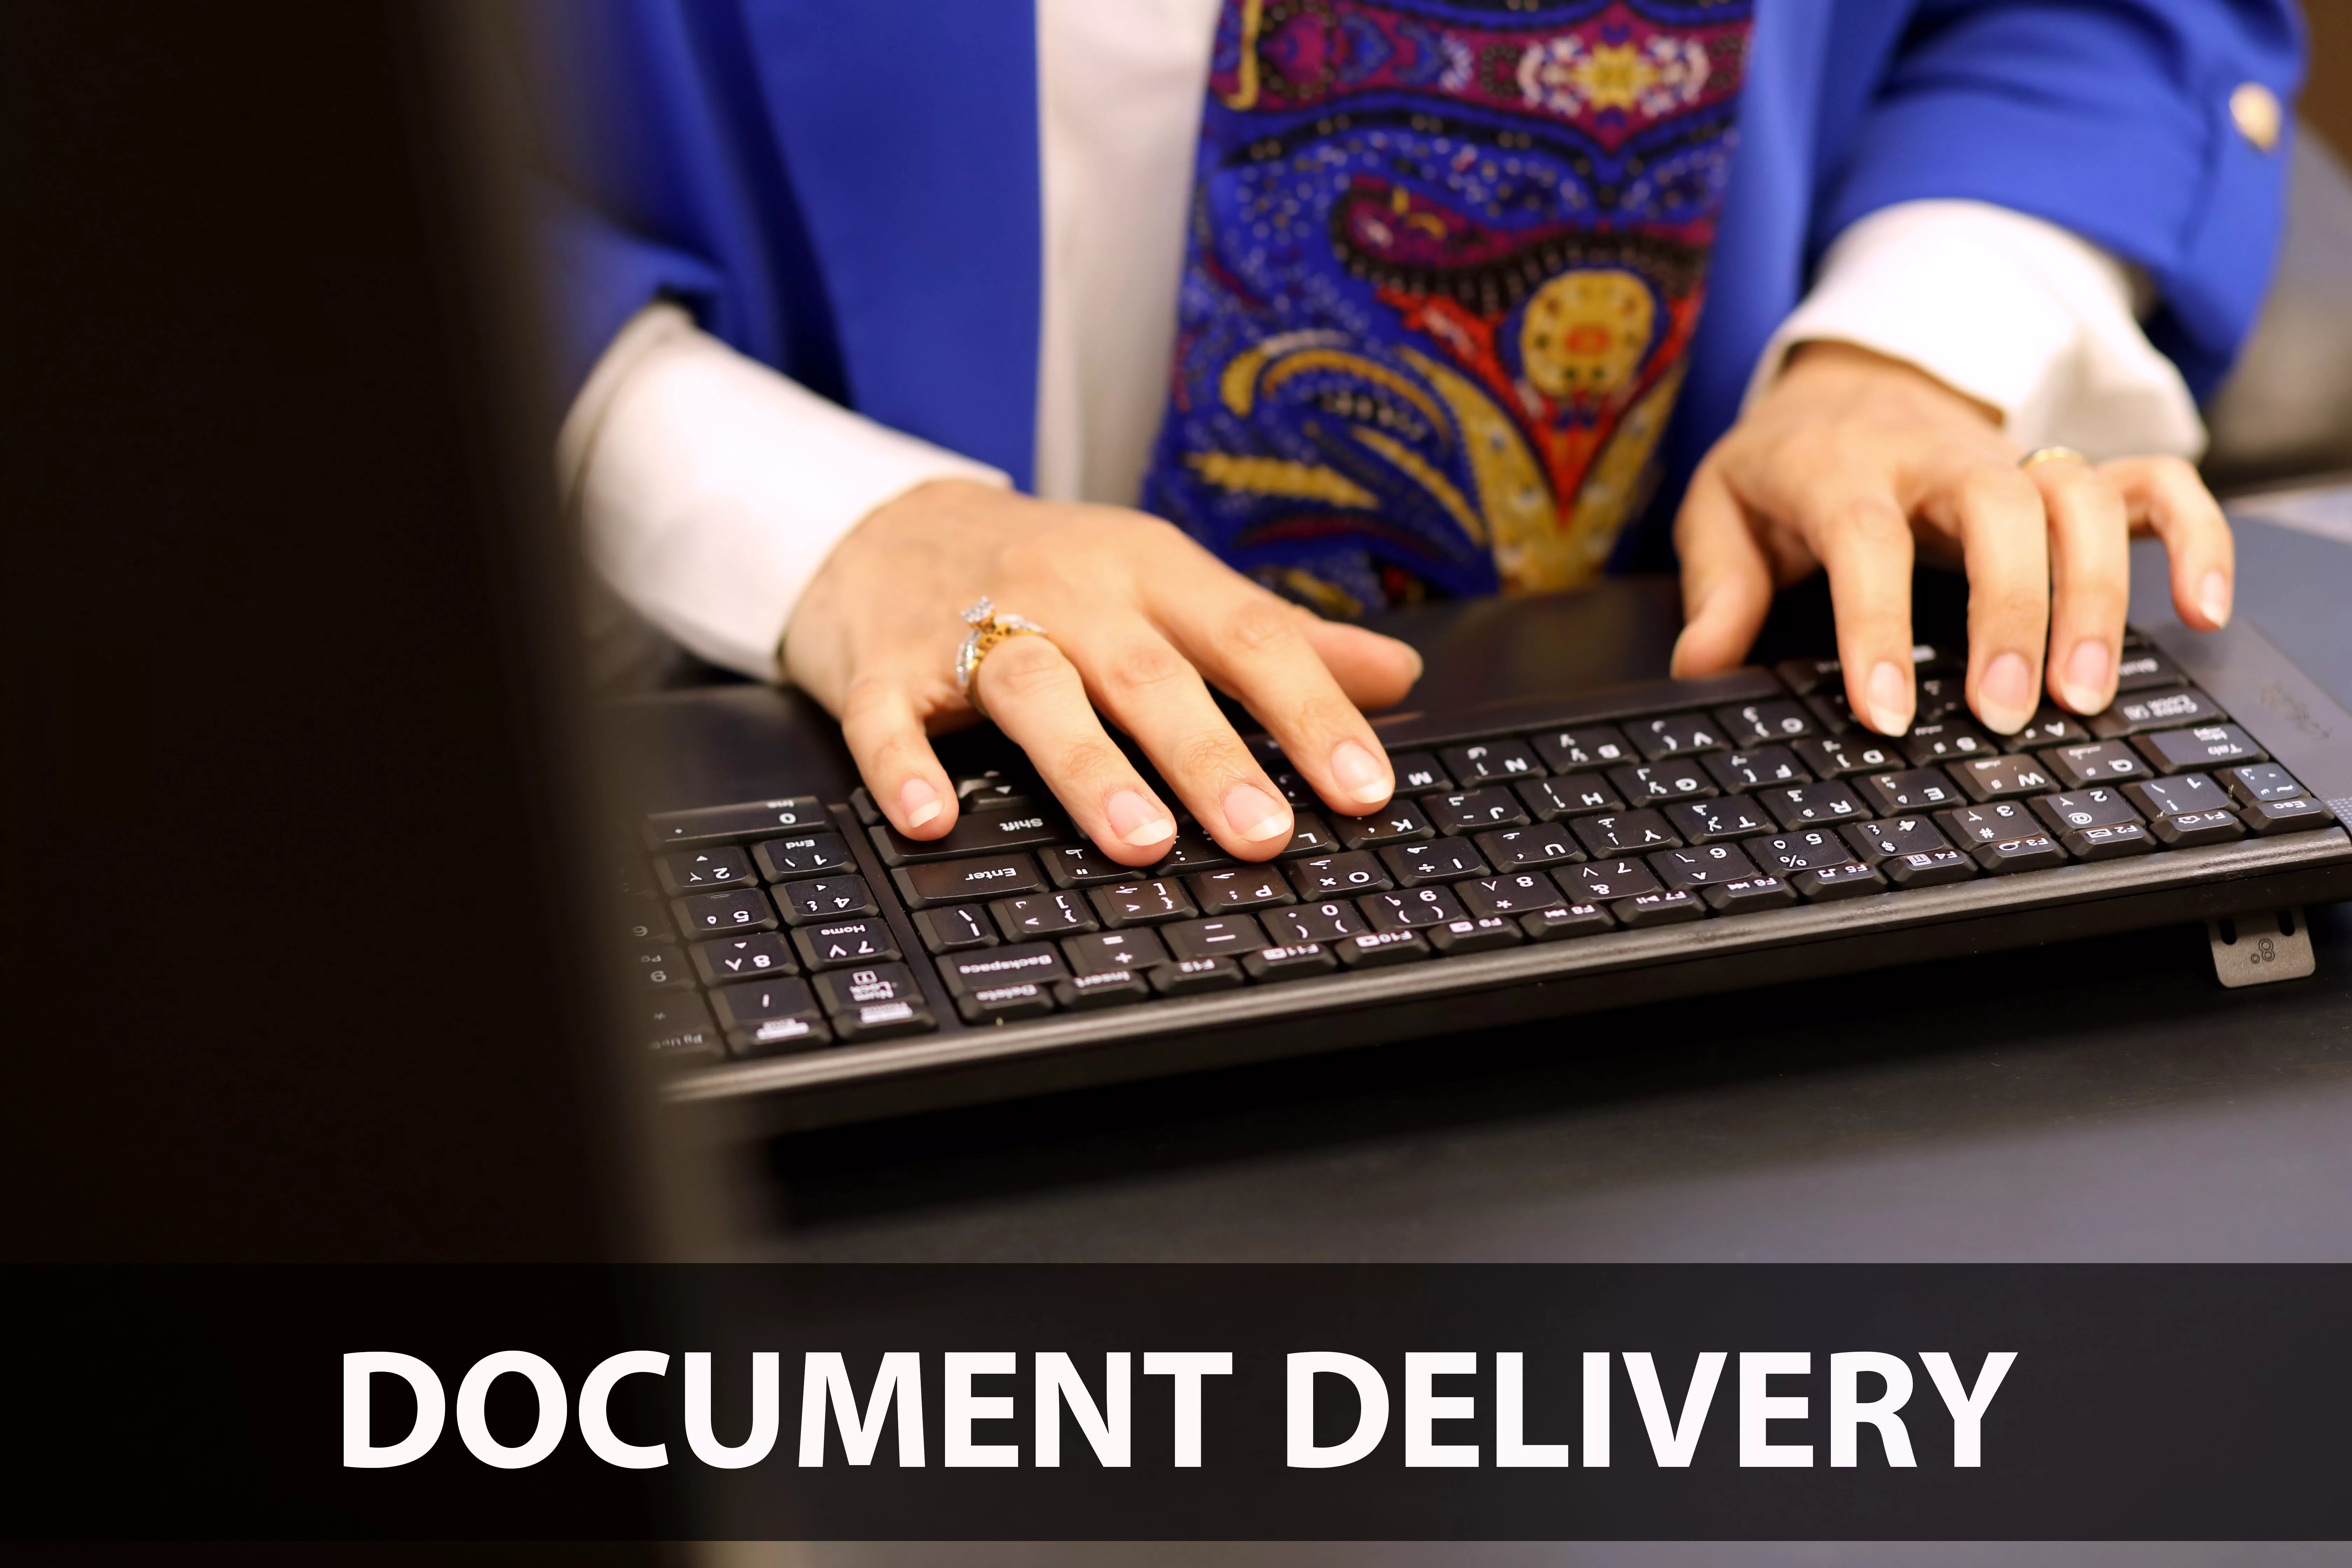 DOCUMENT DELIVERY